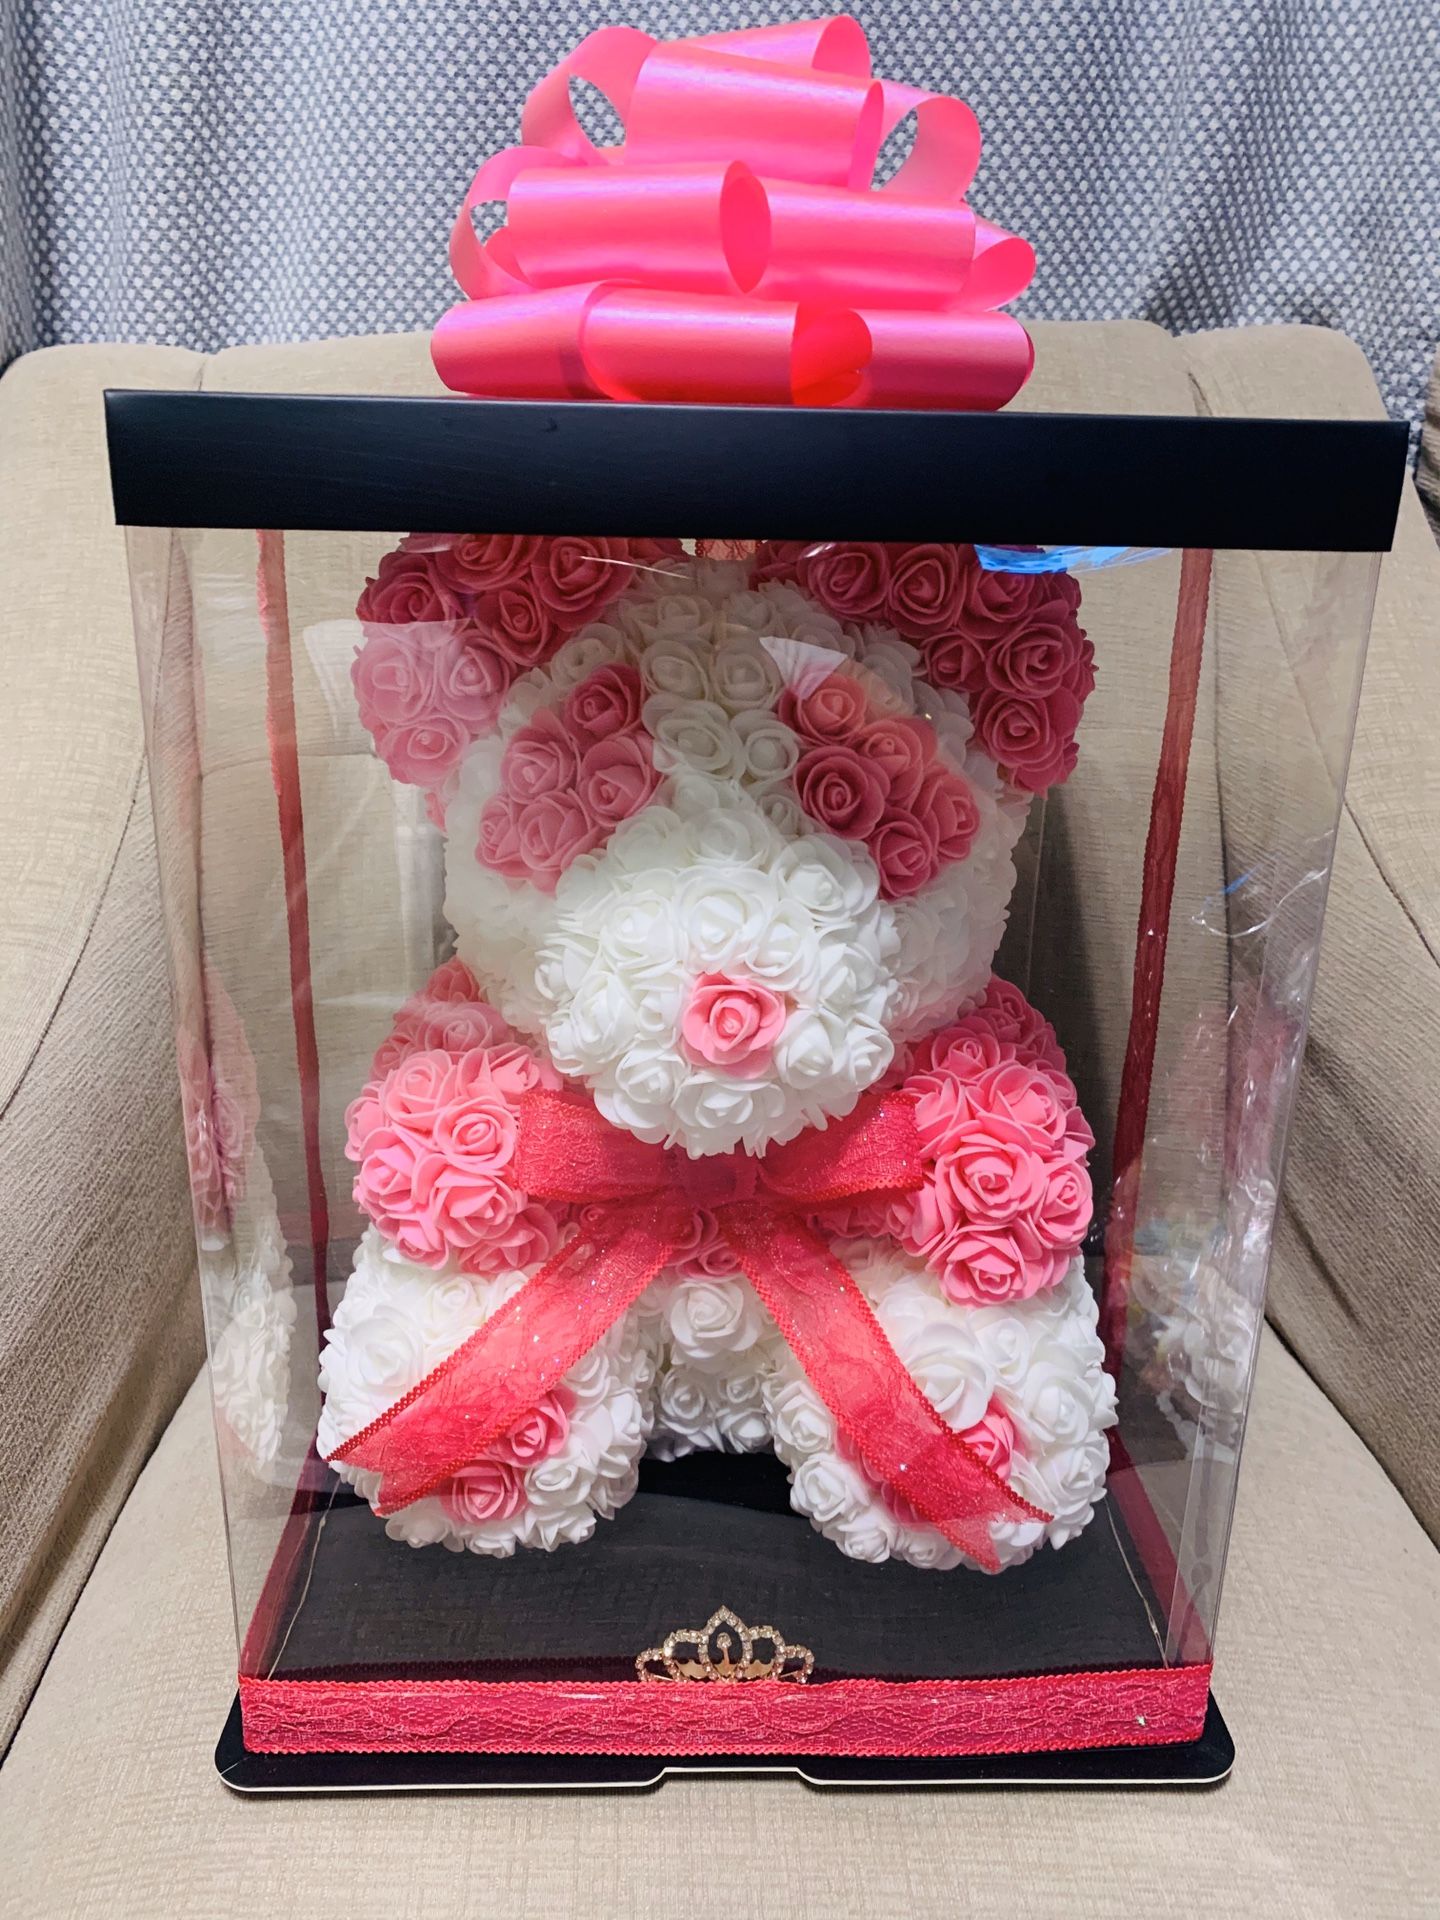 Rose bear Big 15 inches Beautiful foam rose 🌹 bear perfect gift 🎁 for Valentine’s 💝wedding 👰, birthday 🎂 anniversary or just to show how much you love